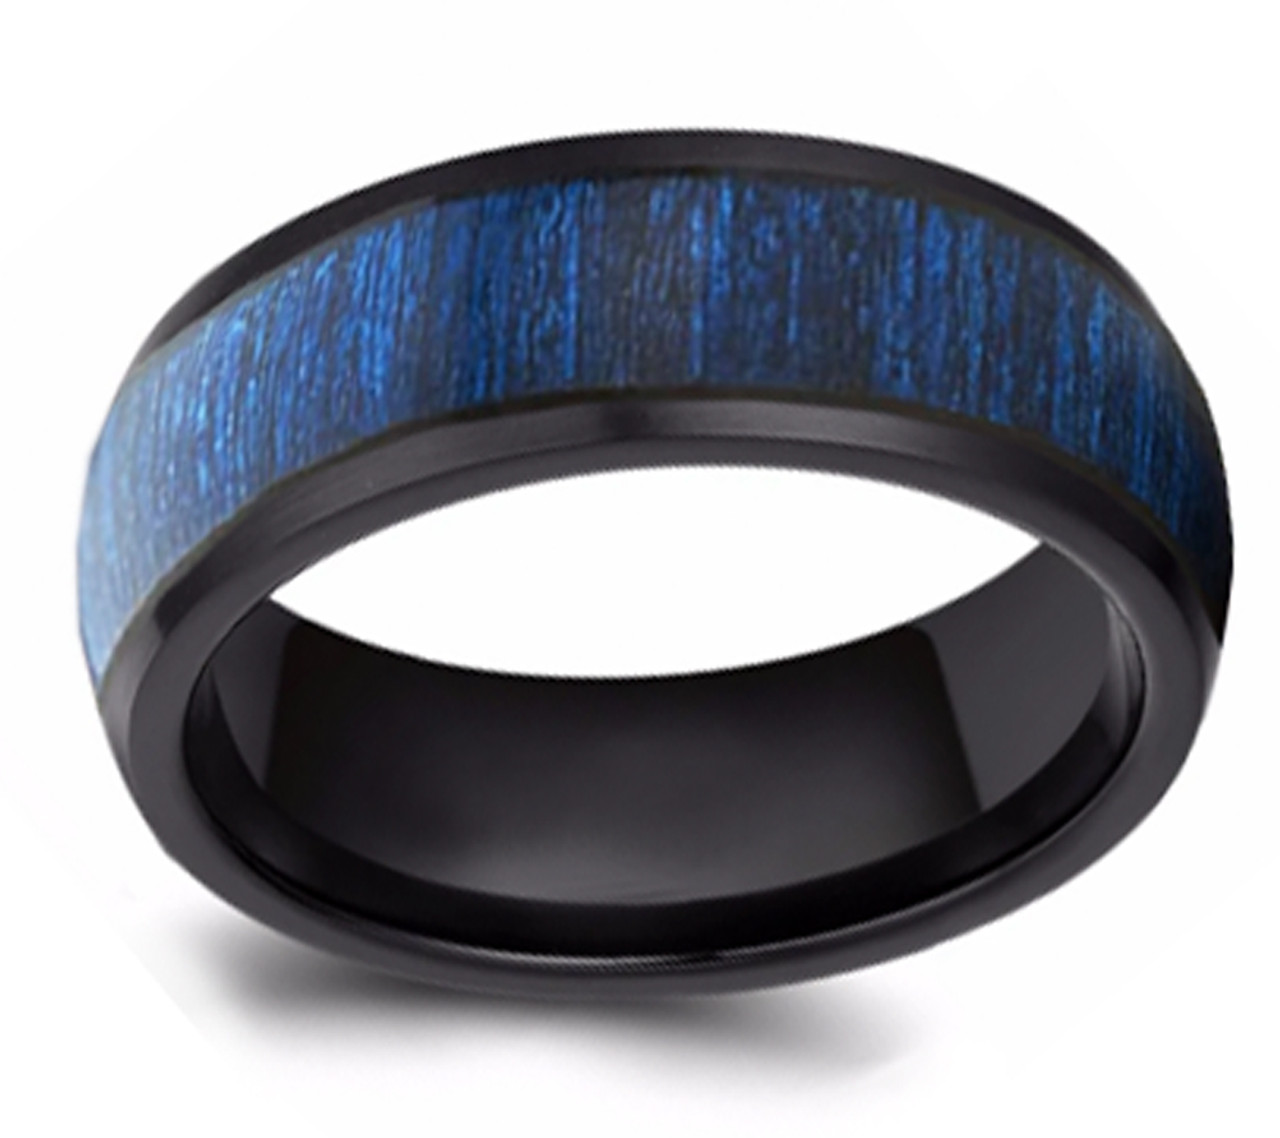 (8mm) Unisex or Men's Tungsten Carbide Wedding ring bands. Black Band and Blue Wood Inlay. High Polish Domed Top Tungsten Carbide Ring